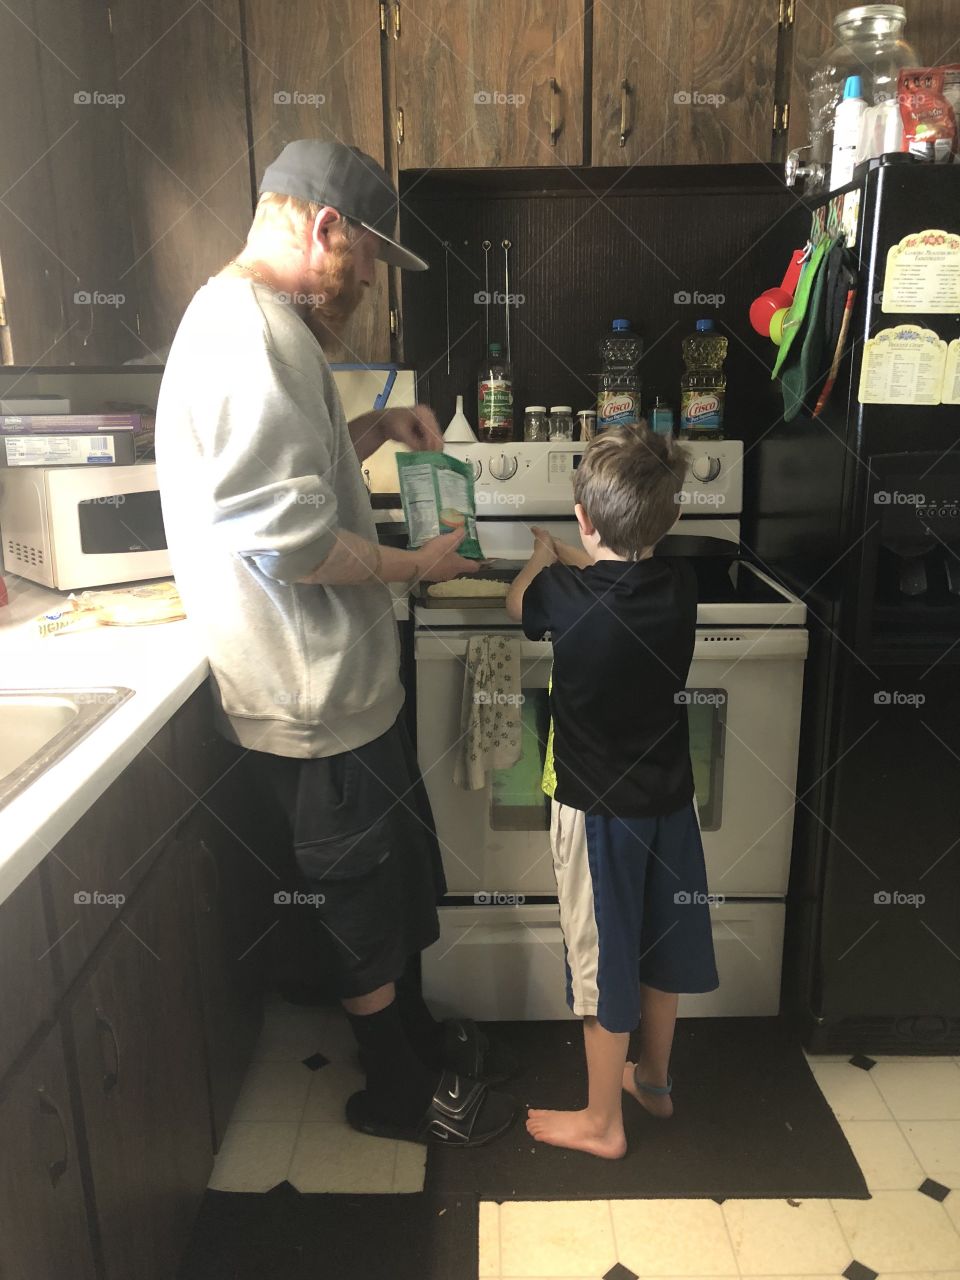 Father and son quality cooking time